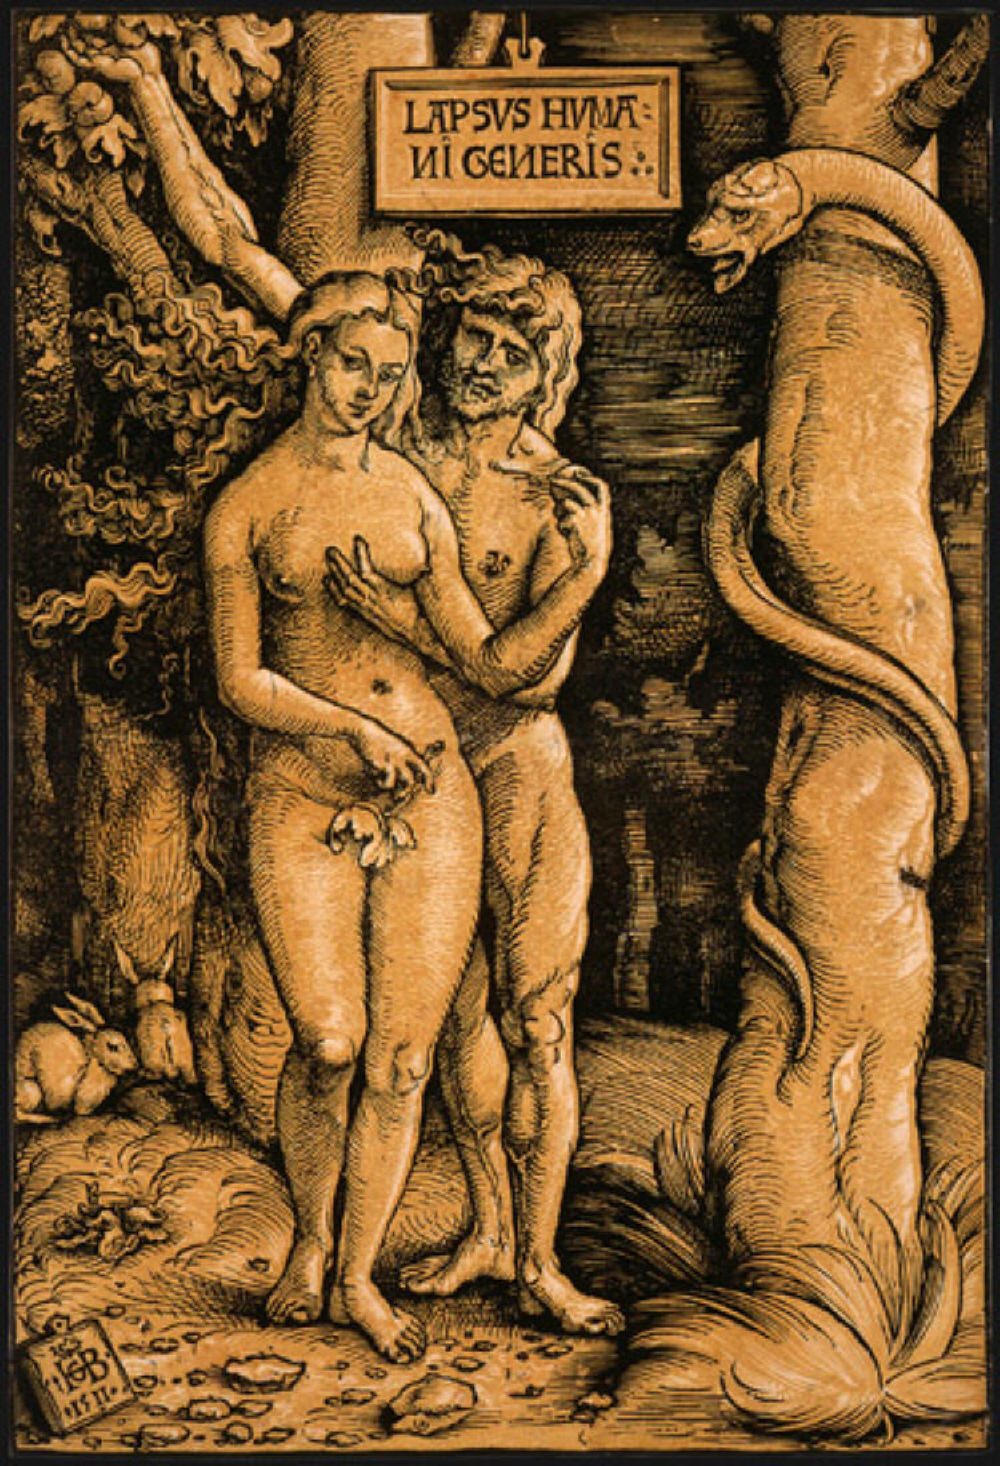 dam and Eve and the serpent in the Garden of Eden.